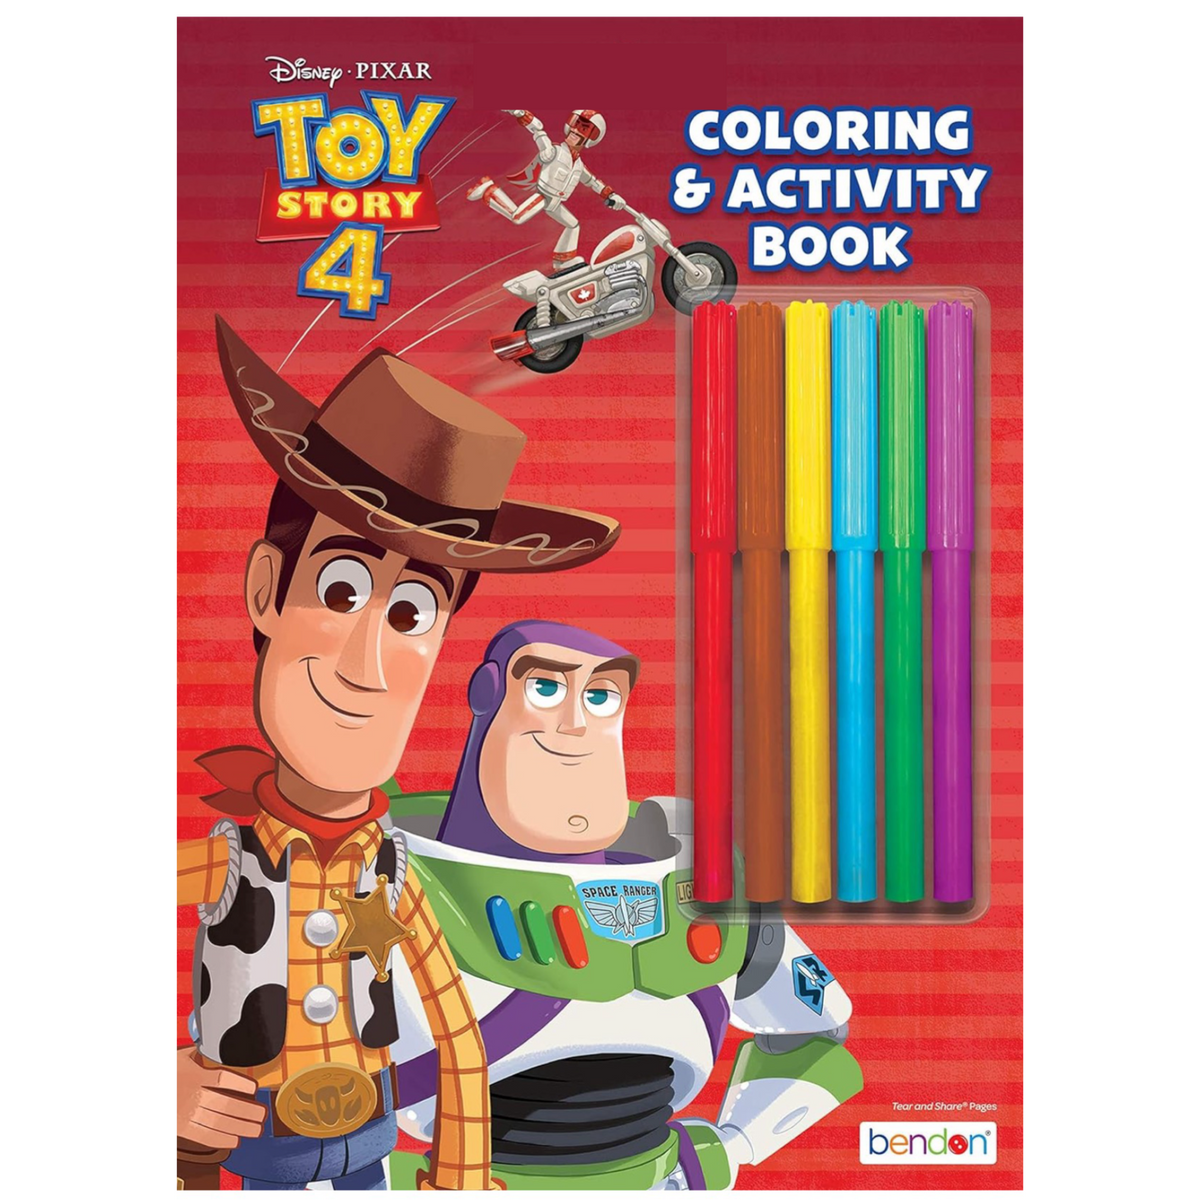 32pg Toy Story 4 Coloring Activity Book With 6 Markers By Bendon